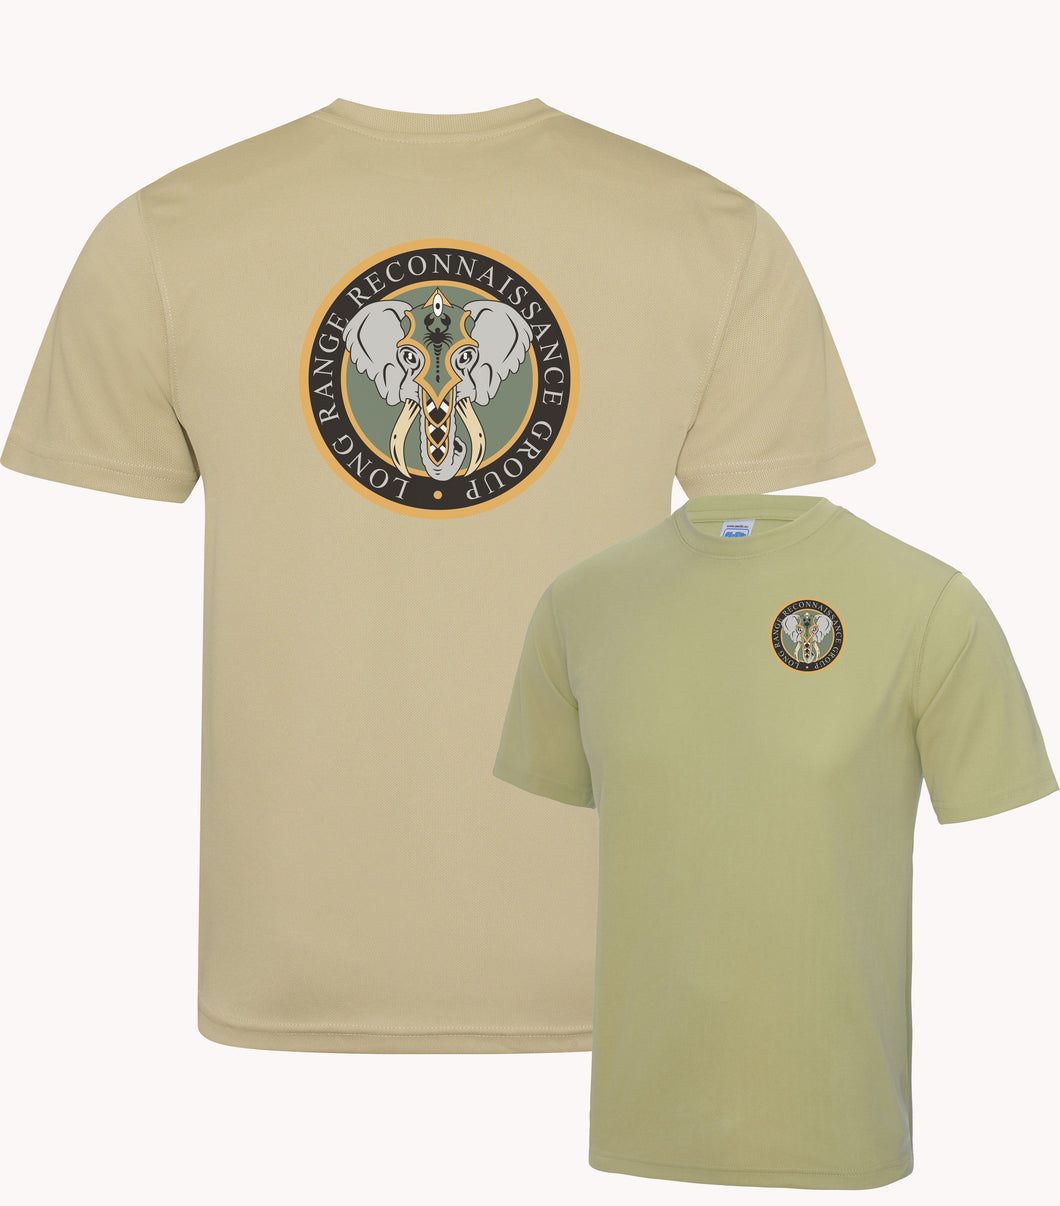 Long Range Reconnaissance Group (LRRG) (op newcombe / mali) recce - Double Colour Print- Wicking T-Shirt (sand colour only)